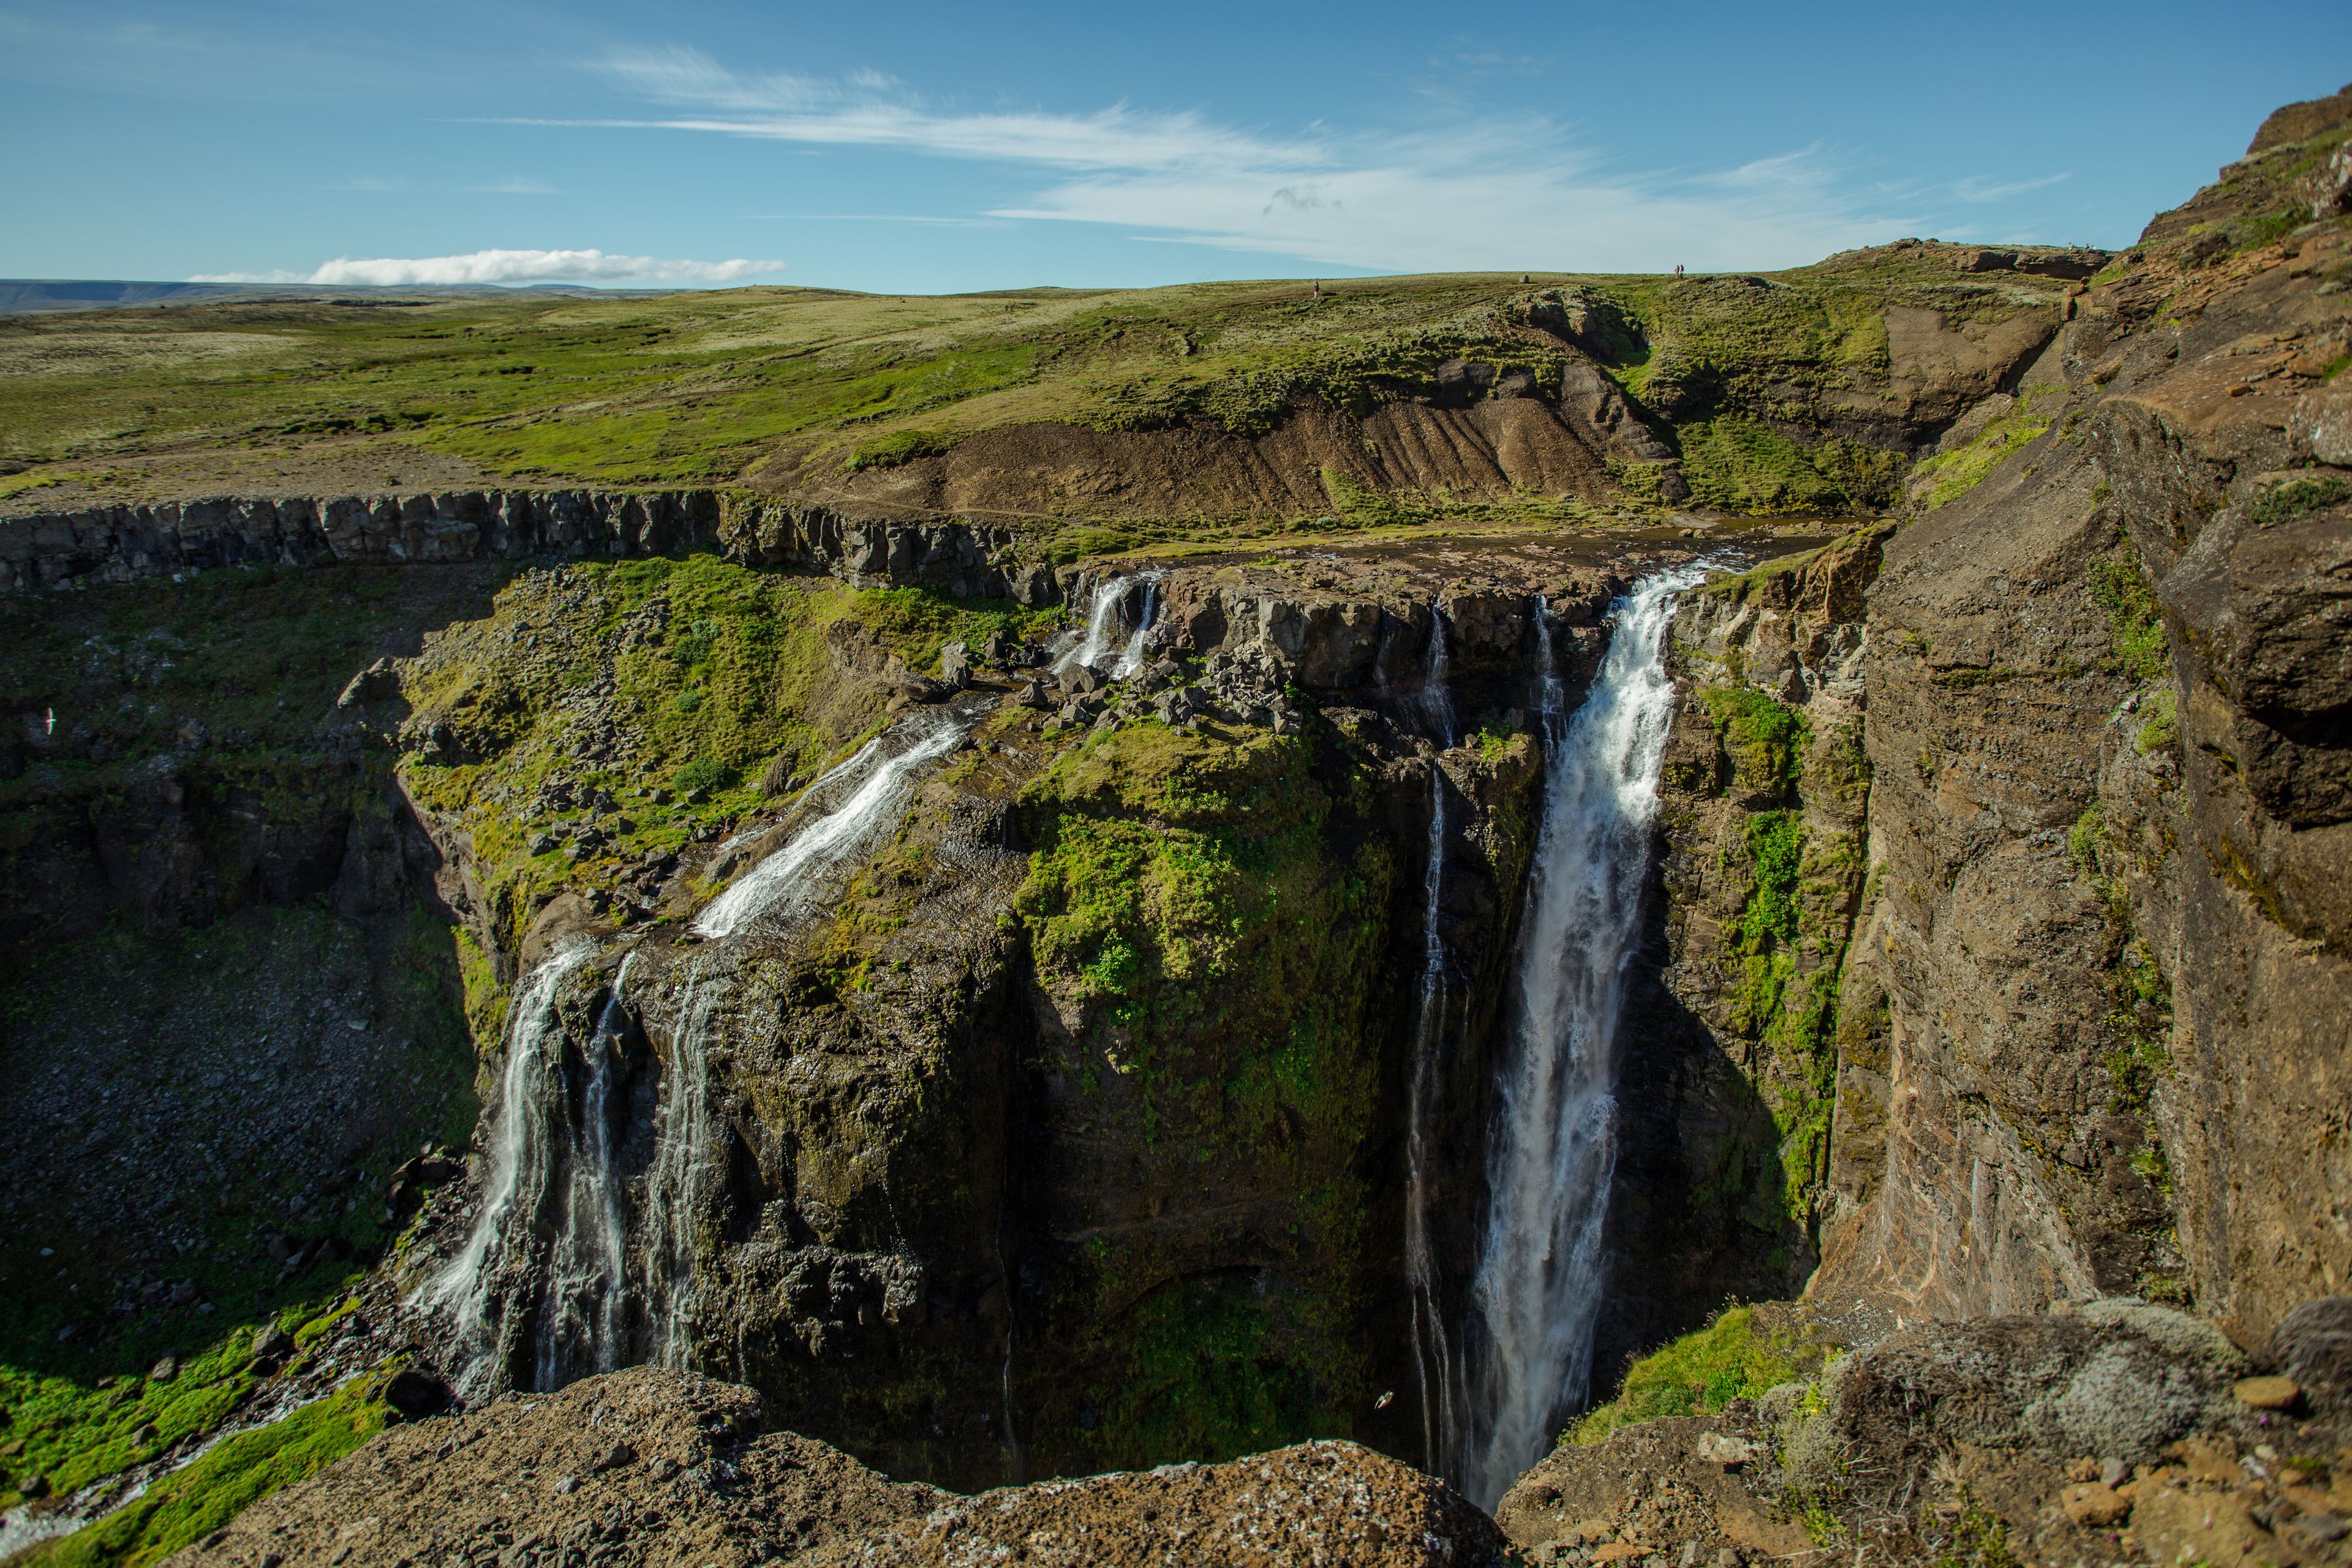 The Glymur waterfall and its green landscape